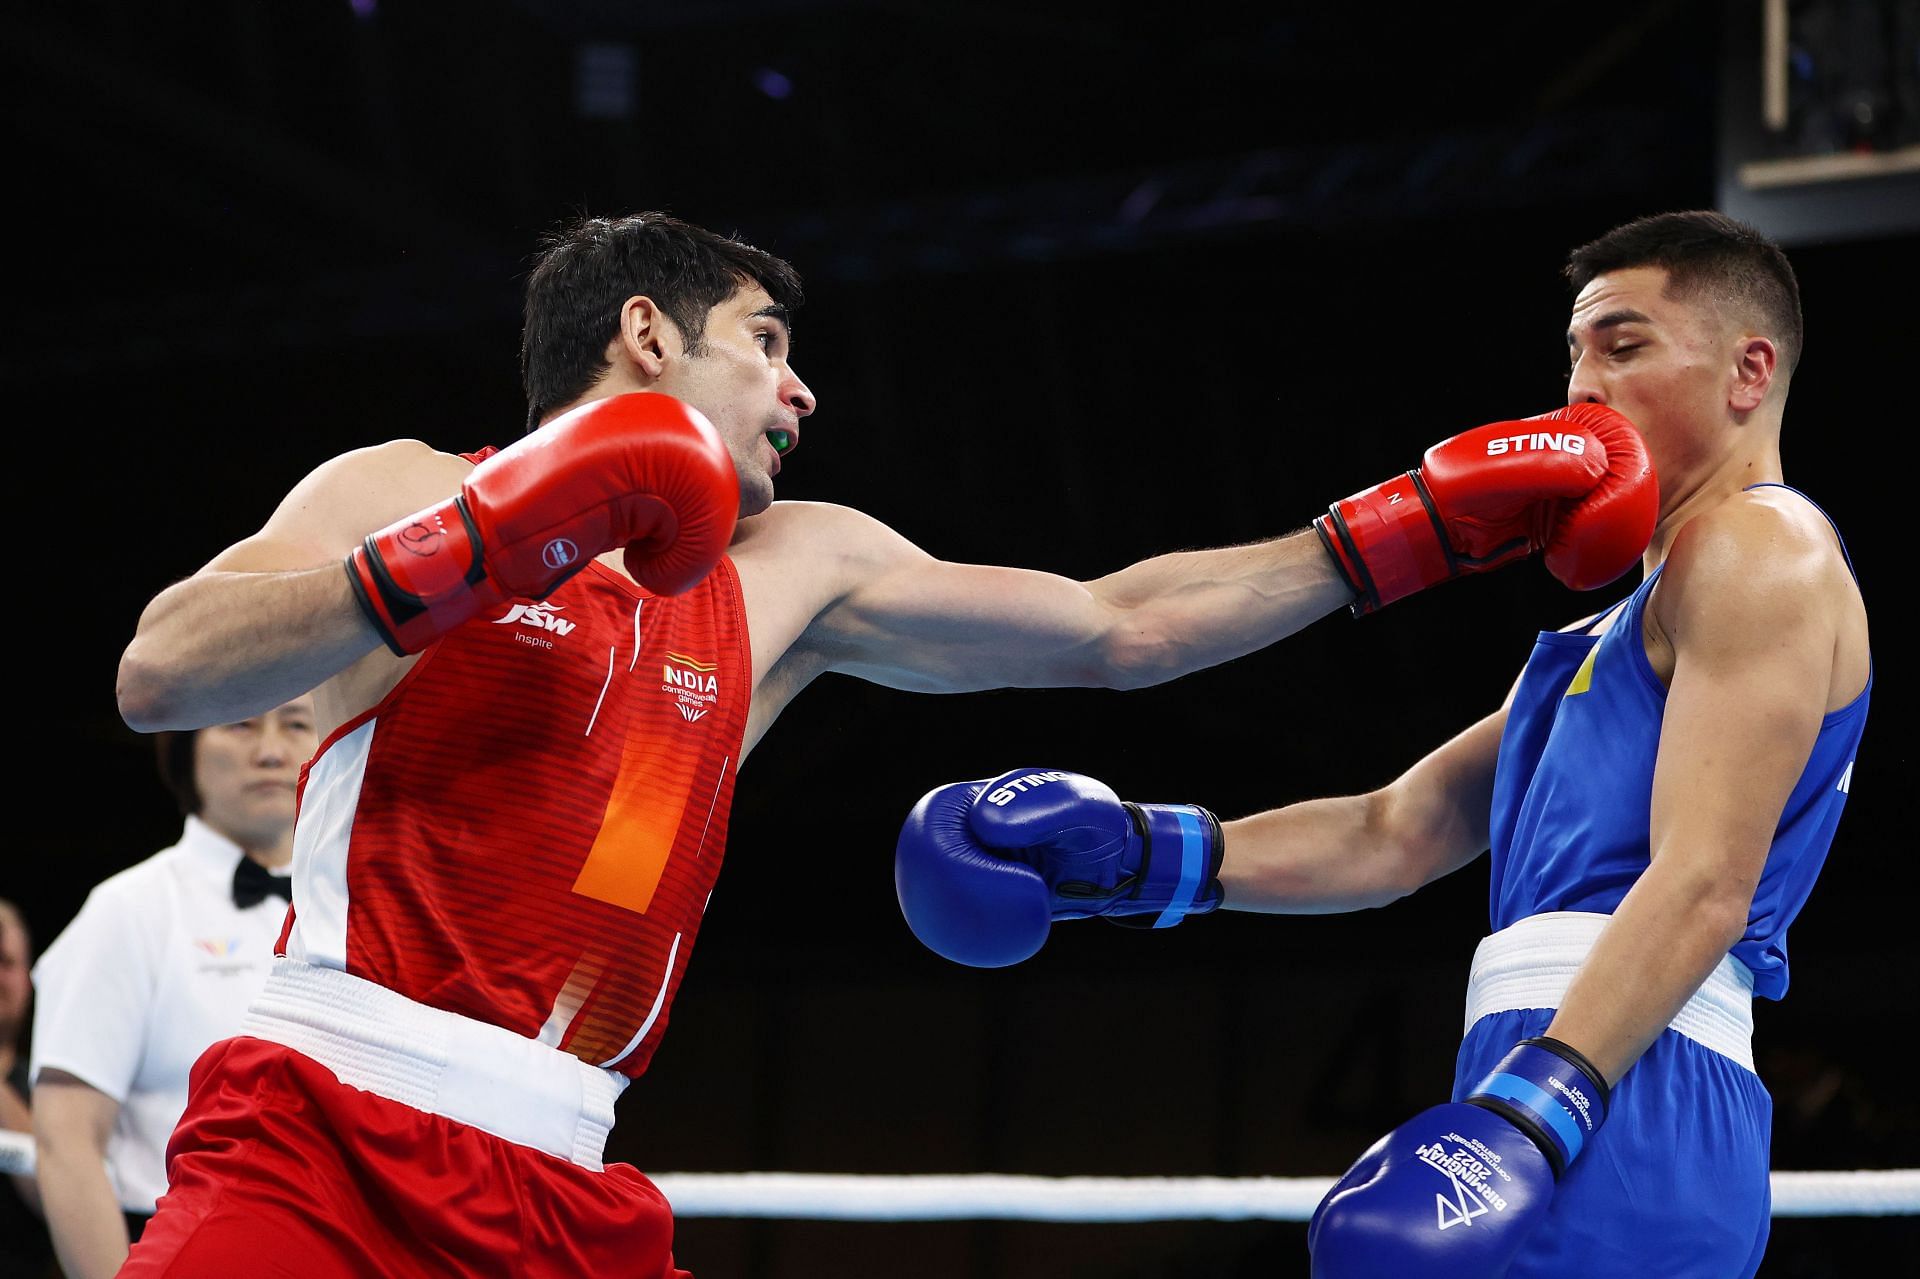 Boxing - Commonwealth Games: Day 7 Rohit Tokas in action